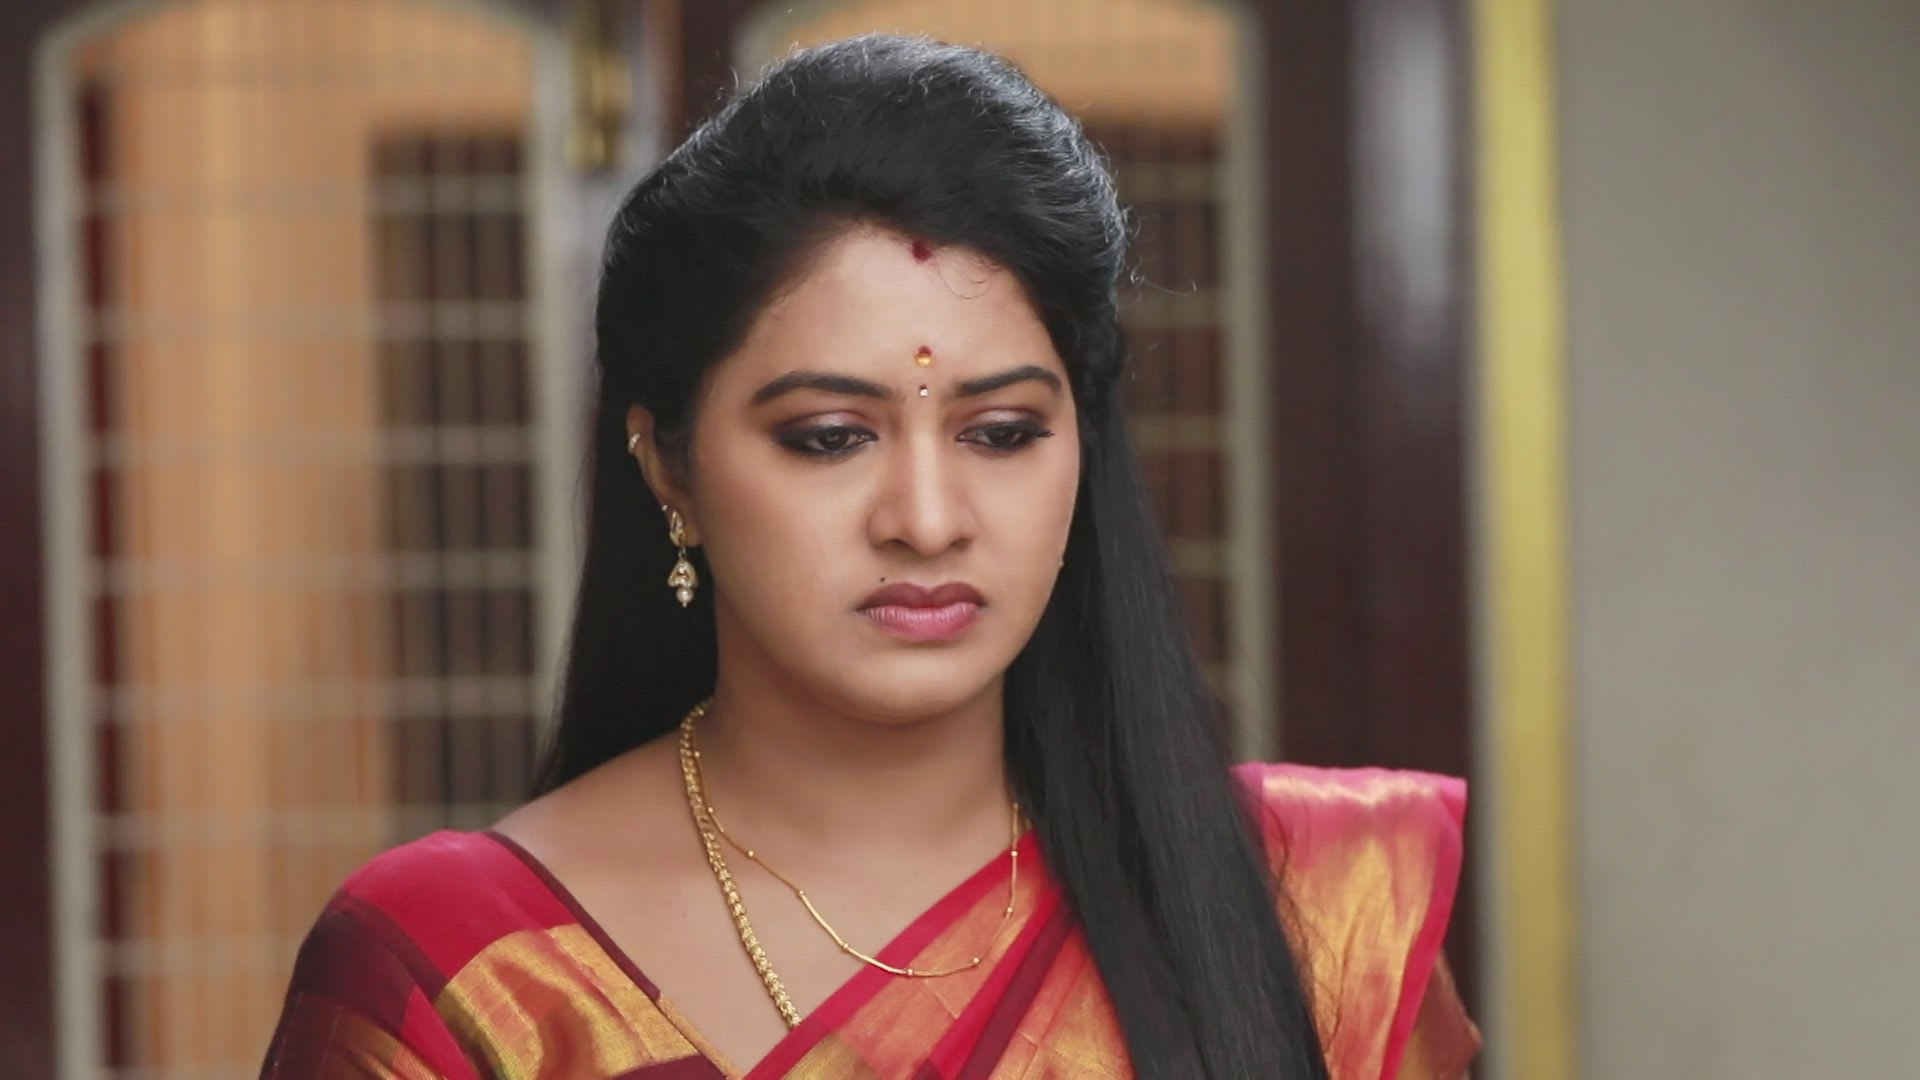 A Crucial Moment for Meenakshi